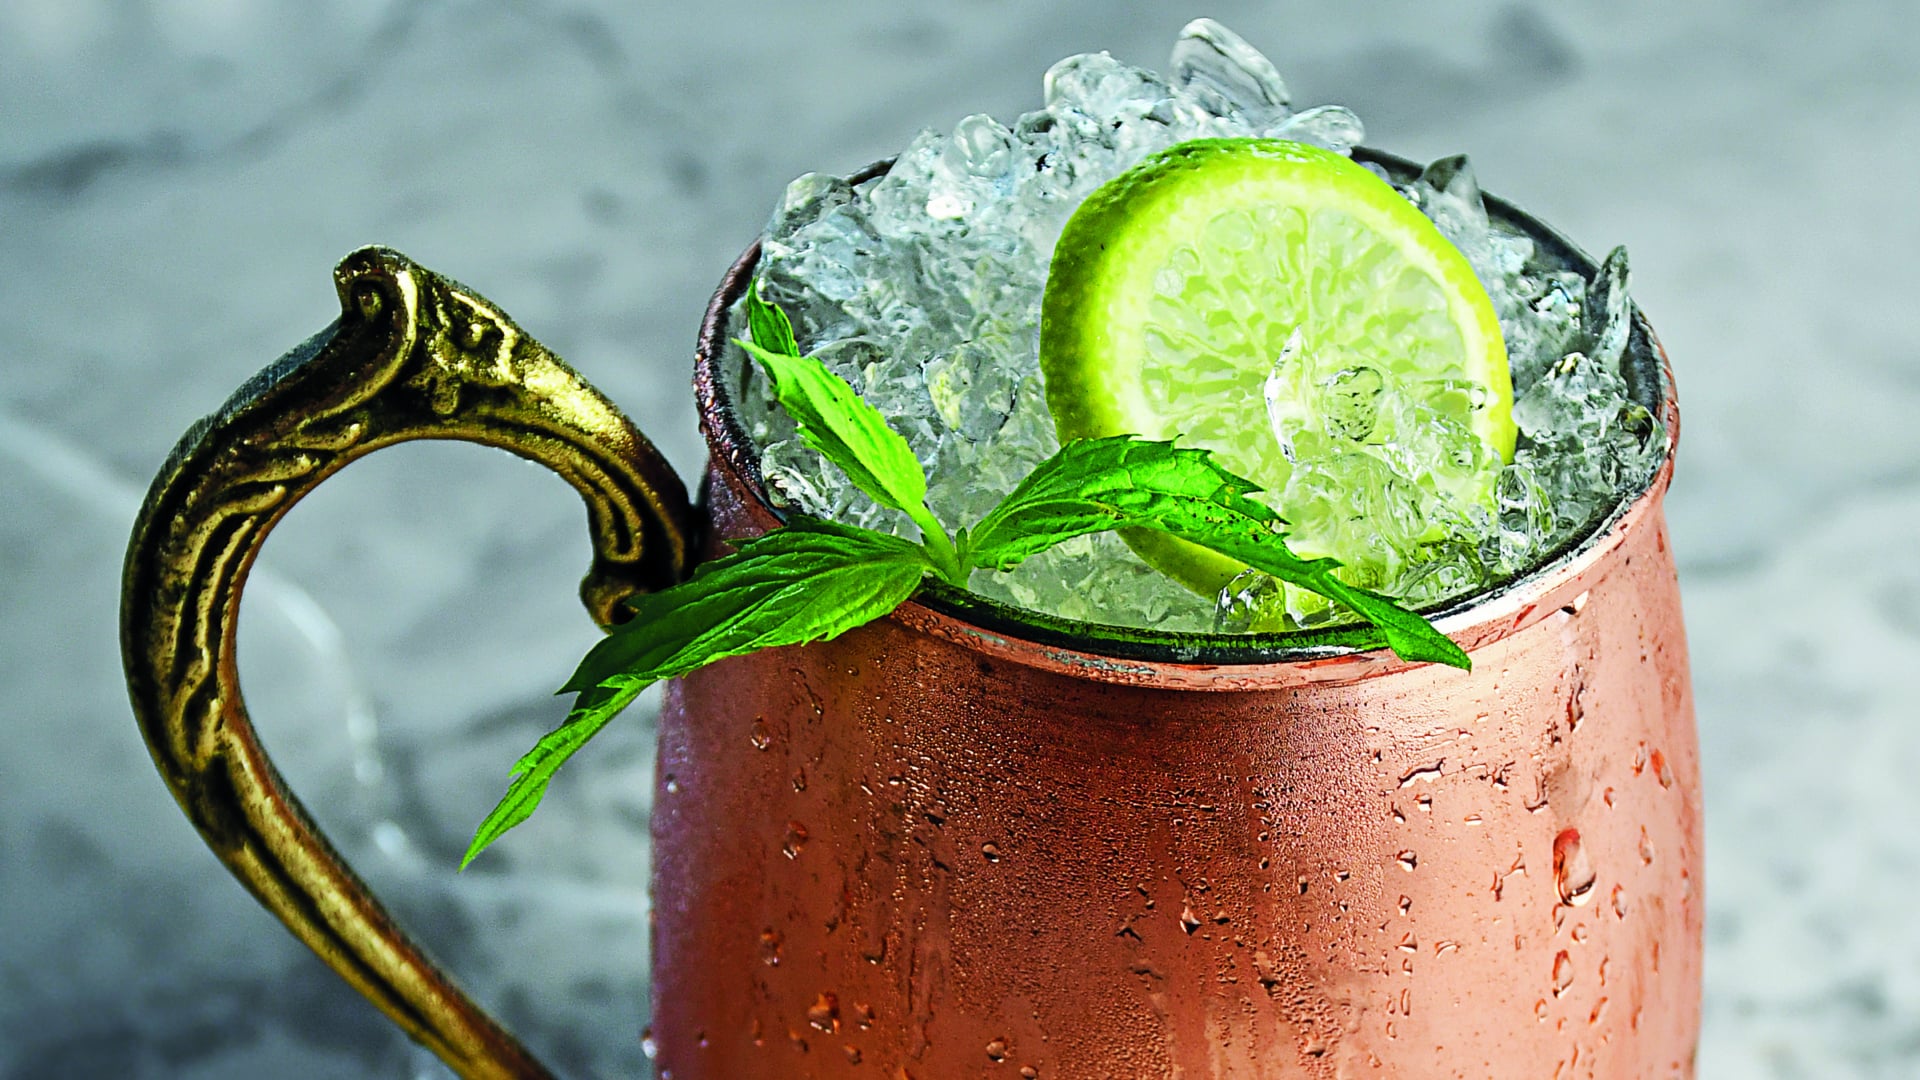 Moscow Mule drink recipe